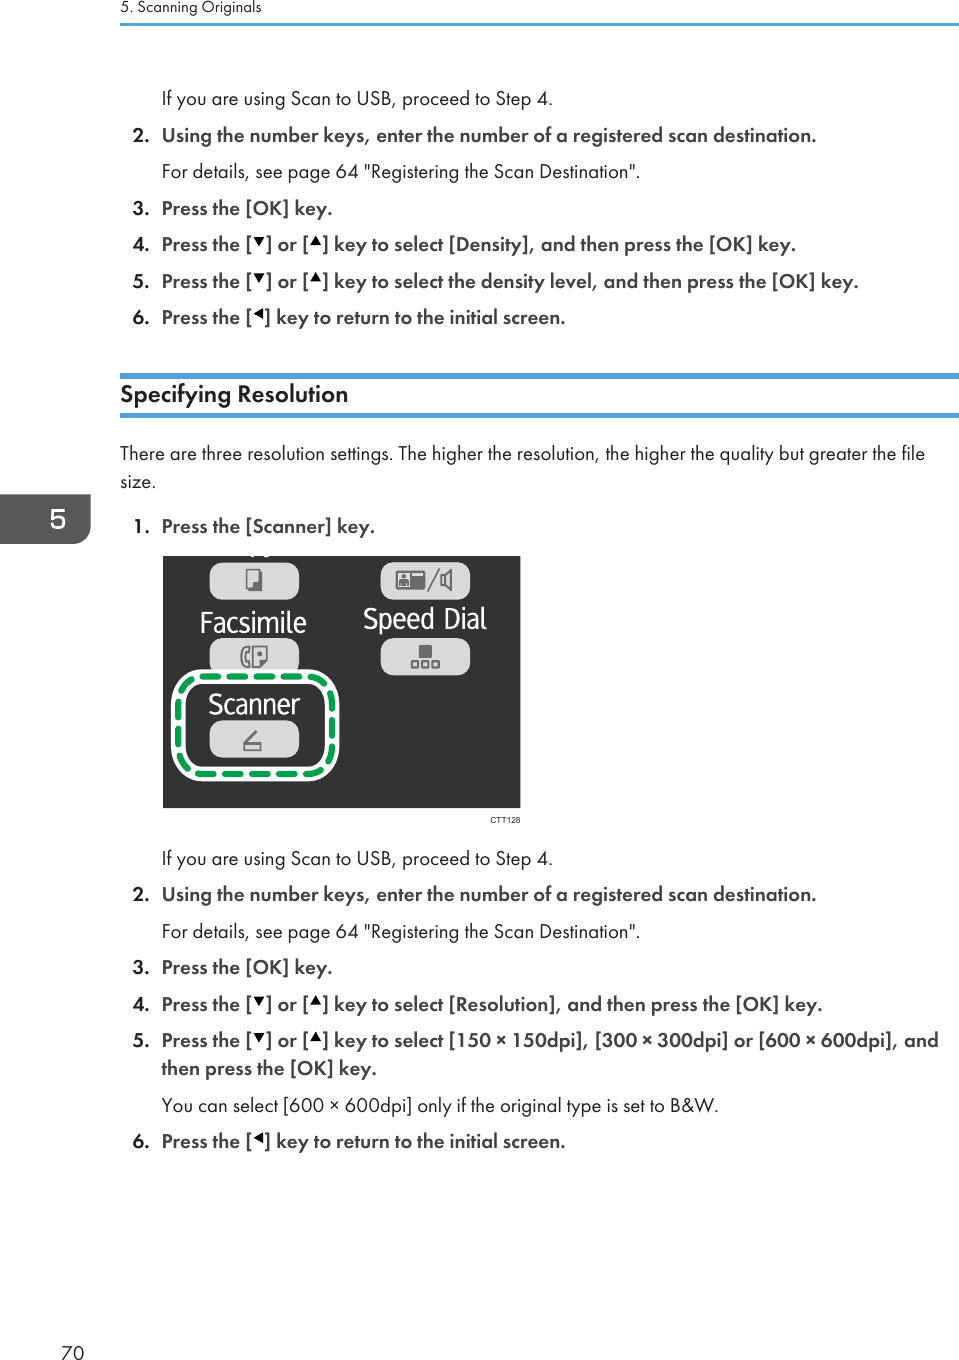 If you are using Scan to USB, proceed to Step 4.2. Using the number keys, enter the number of a registered scan destination.For details, see page 64 &quot;Registering the Scan Destination&quot;.3. Press the [OK] key.4. Press the [ ] or [ ] key to select [Density], and then press the [OK] key.5. Press the [ ] or [ ] key to select the density level, and then press the [OK] key.6. Press the [ ] key to return to the initial screen.Specifying ResolutionThere are three resolution settings. The higher the resolution, the higher the quality but greater the filesize.1. Press the [Scanner] key.CTT128If you are using Scan to USB, proceed to Step 4.2. Using the number keys, enter the number of a registered scan destination.For details, see page 64 &quot;Registering the Scan Destination&quot;.3. Press the [OK] key.4. Press the [ ] or [ ] key to select [Resolution], and then press the [OK] key.5. Press the [ ] or [ ] key to select [150 × 150dpi], [300 × 300dpi] or [600 × 600dpi], andthen press the [OK] key.You can select [600 × 600dpi] only if the original type is set to B&amp;W.6. Press the [ ] key to return to the initial screen.5. Scanning Originals70